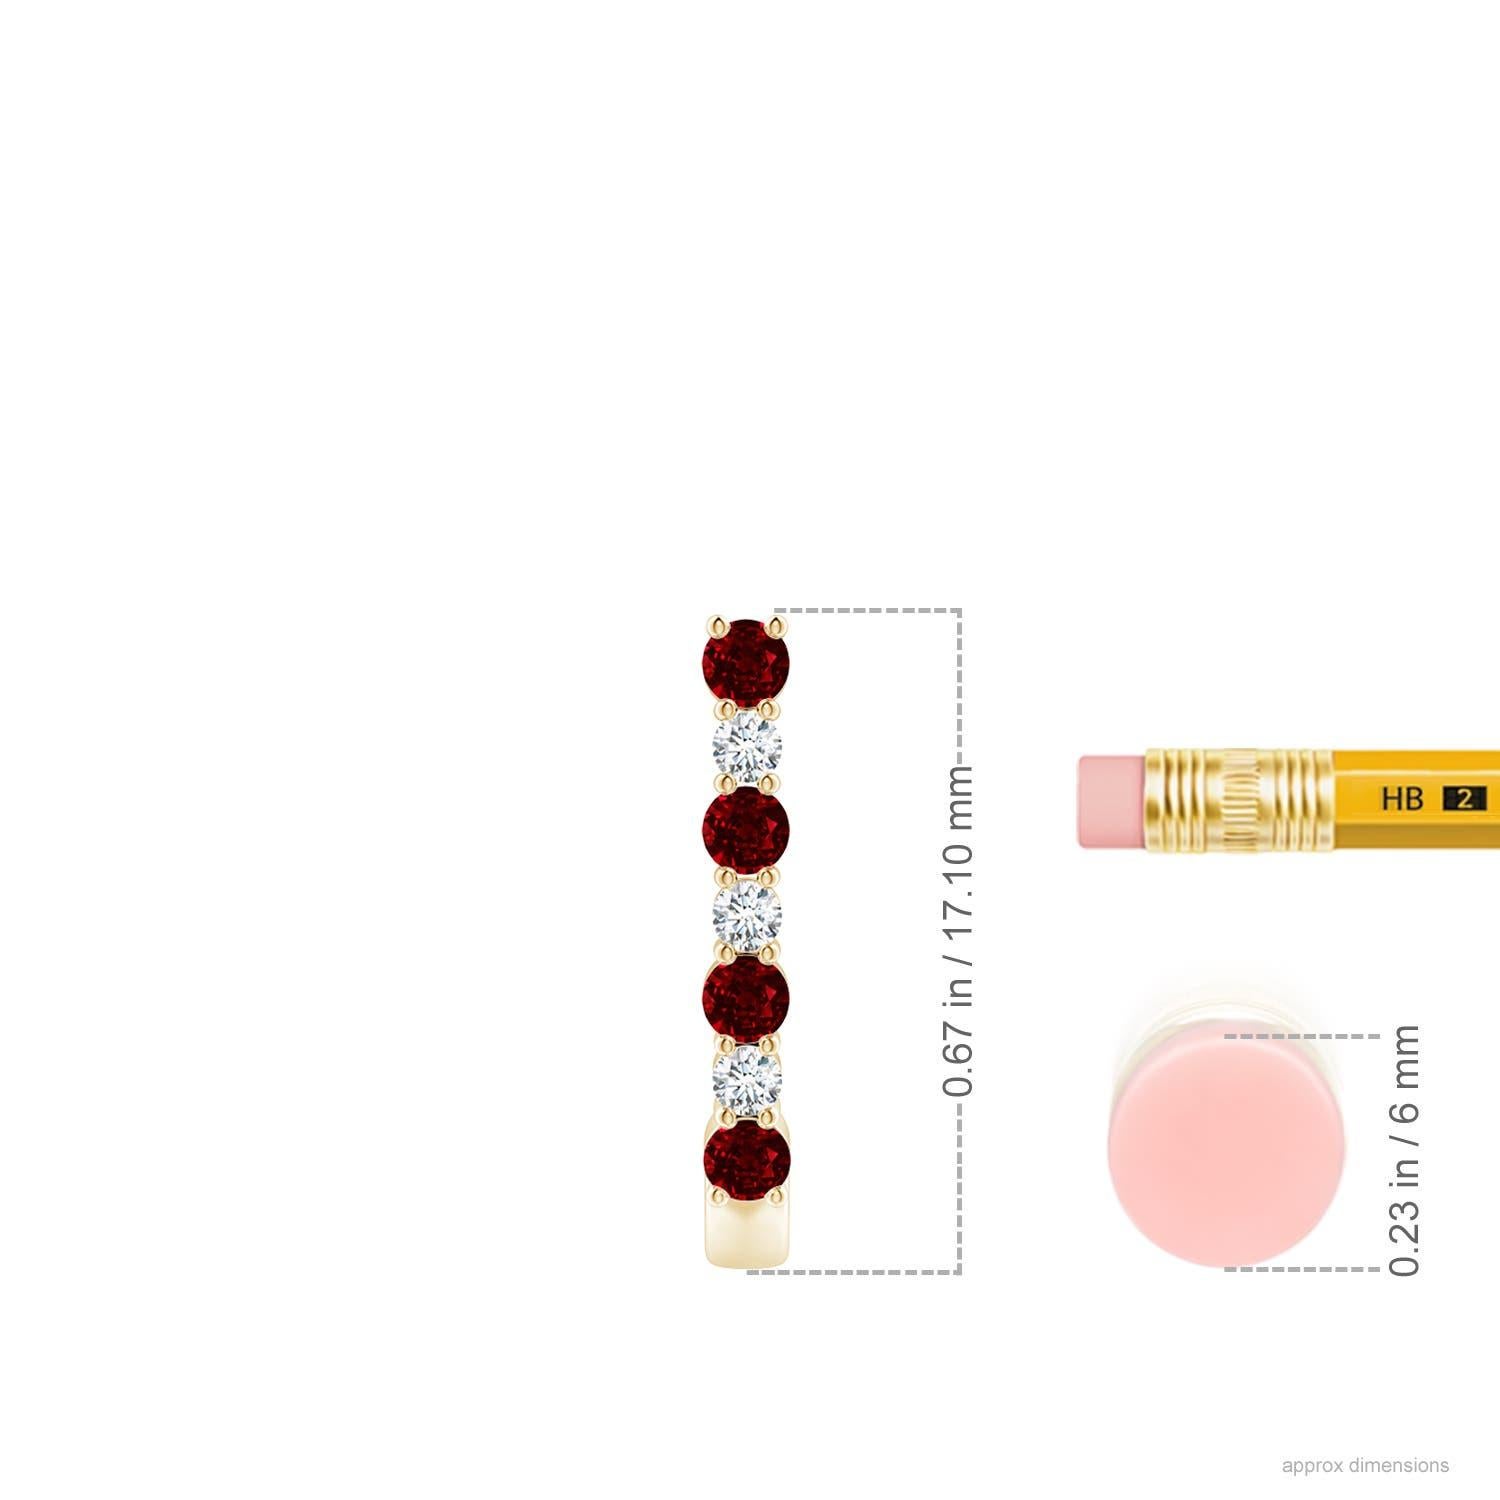 These stunning ruby and diamond hoop earrings are exquisitely crafted in 14k yellow gold. The J hoops are alternately studded with bright red rubies and sparkling diamonds for a captivating effect.
Ruby is the Birthstone for July and traditional